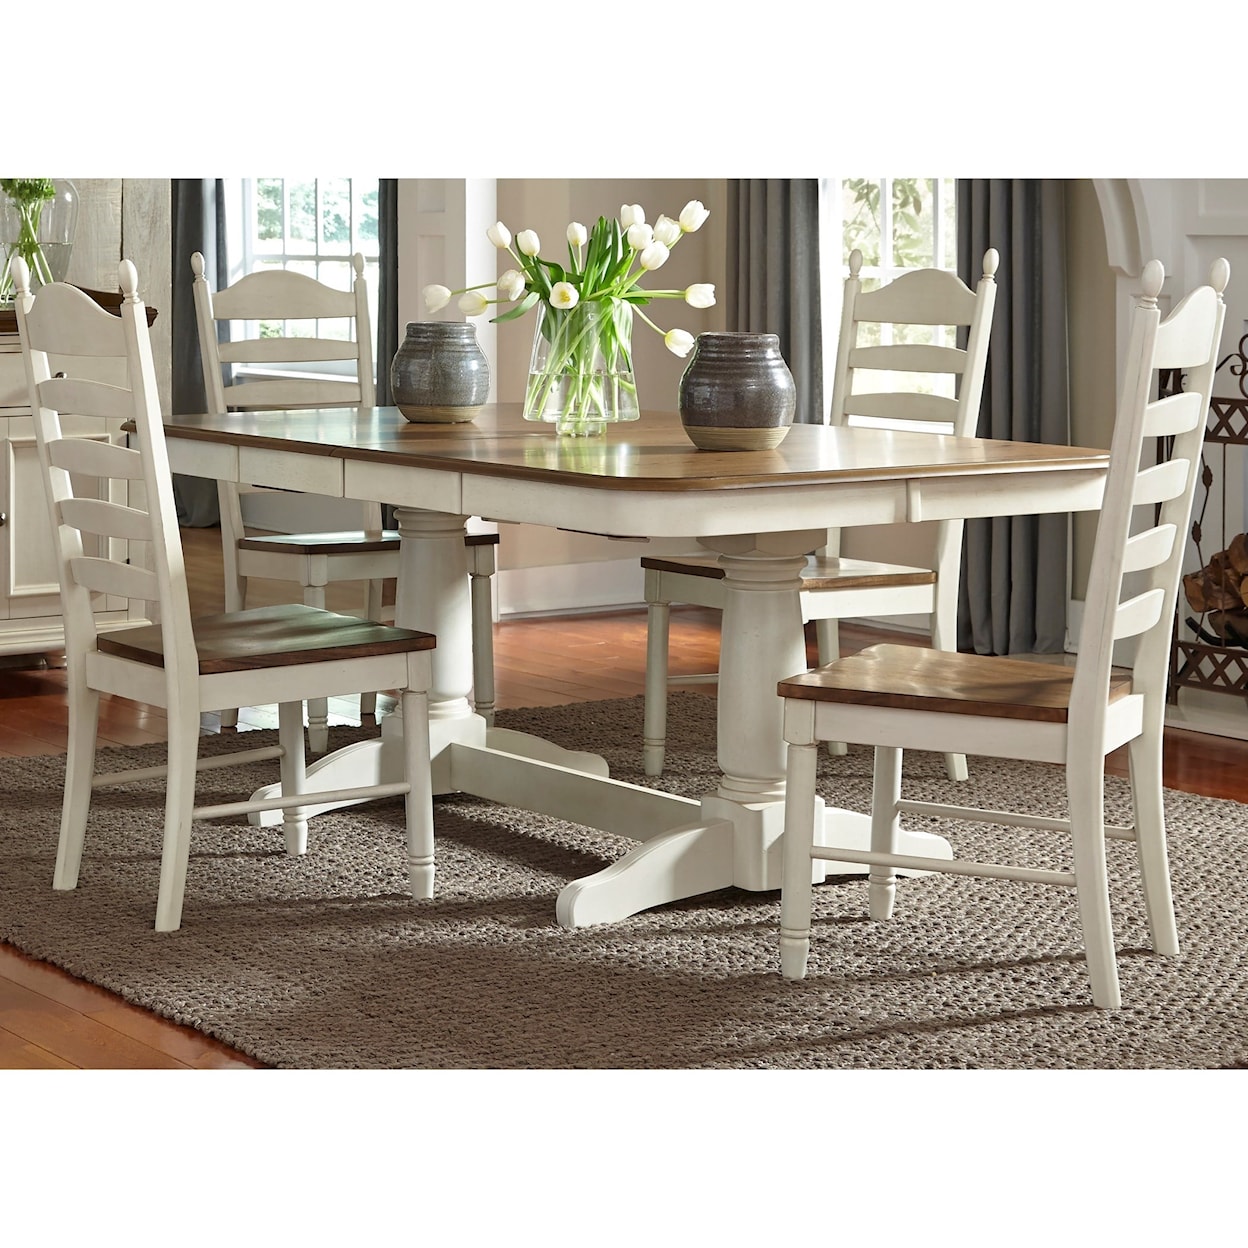 Libby Springfield Dining 5-Piece Trestle Table Dining Set